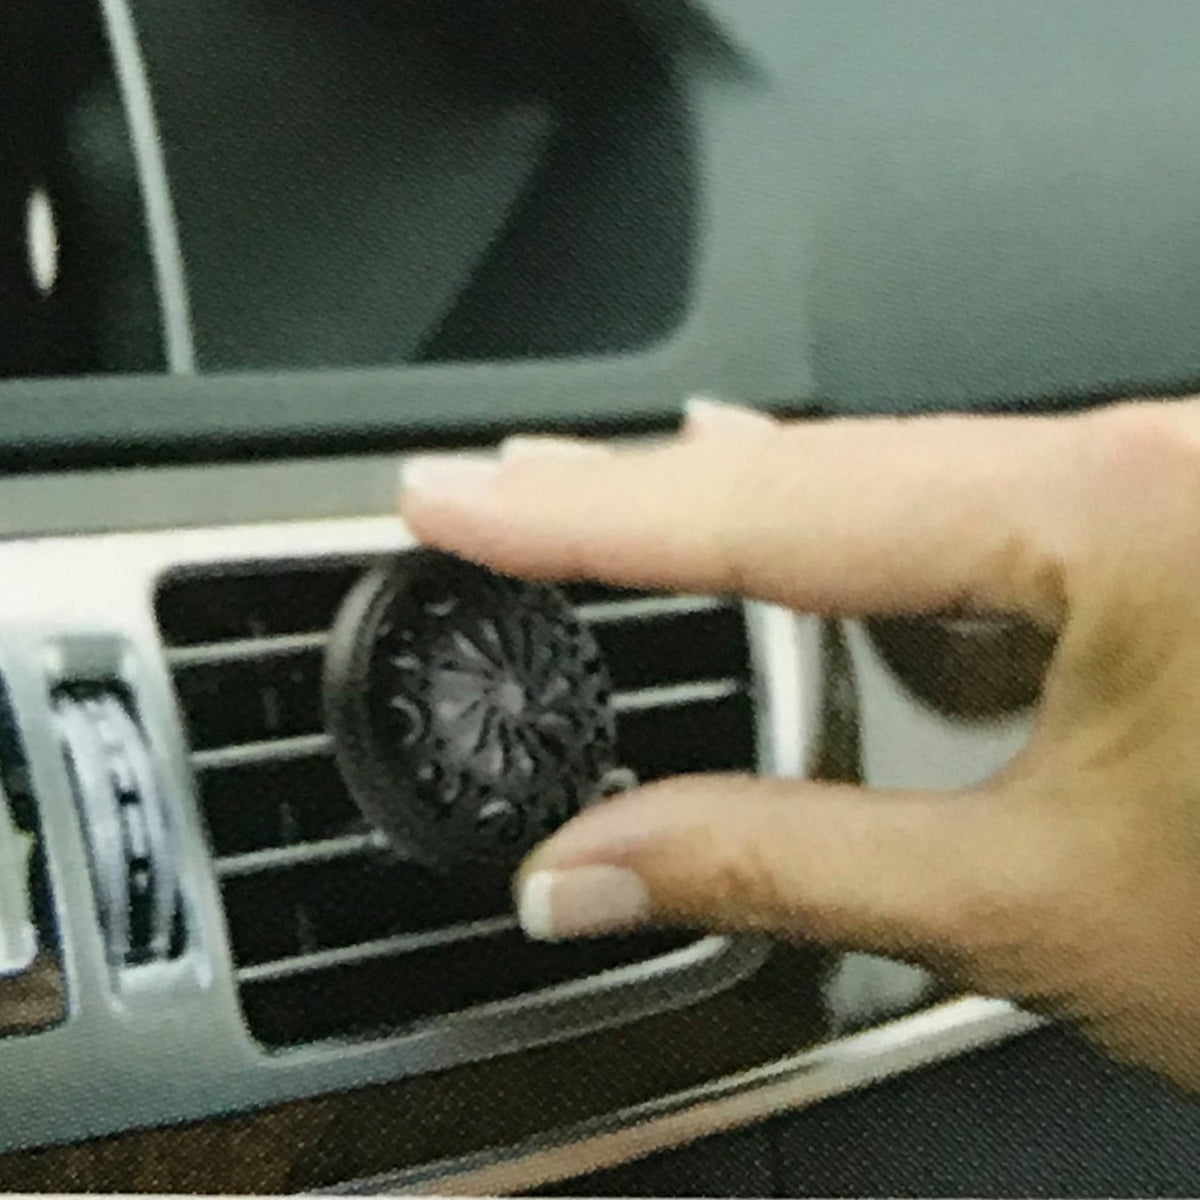 Car diffuser for essential oils. Just add a couple drops of your favorite essential oil and slide the diffuser onto your air vent.